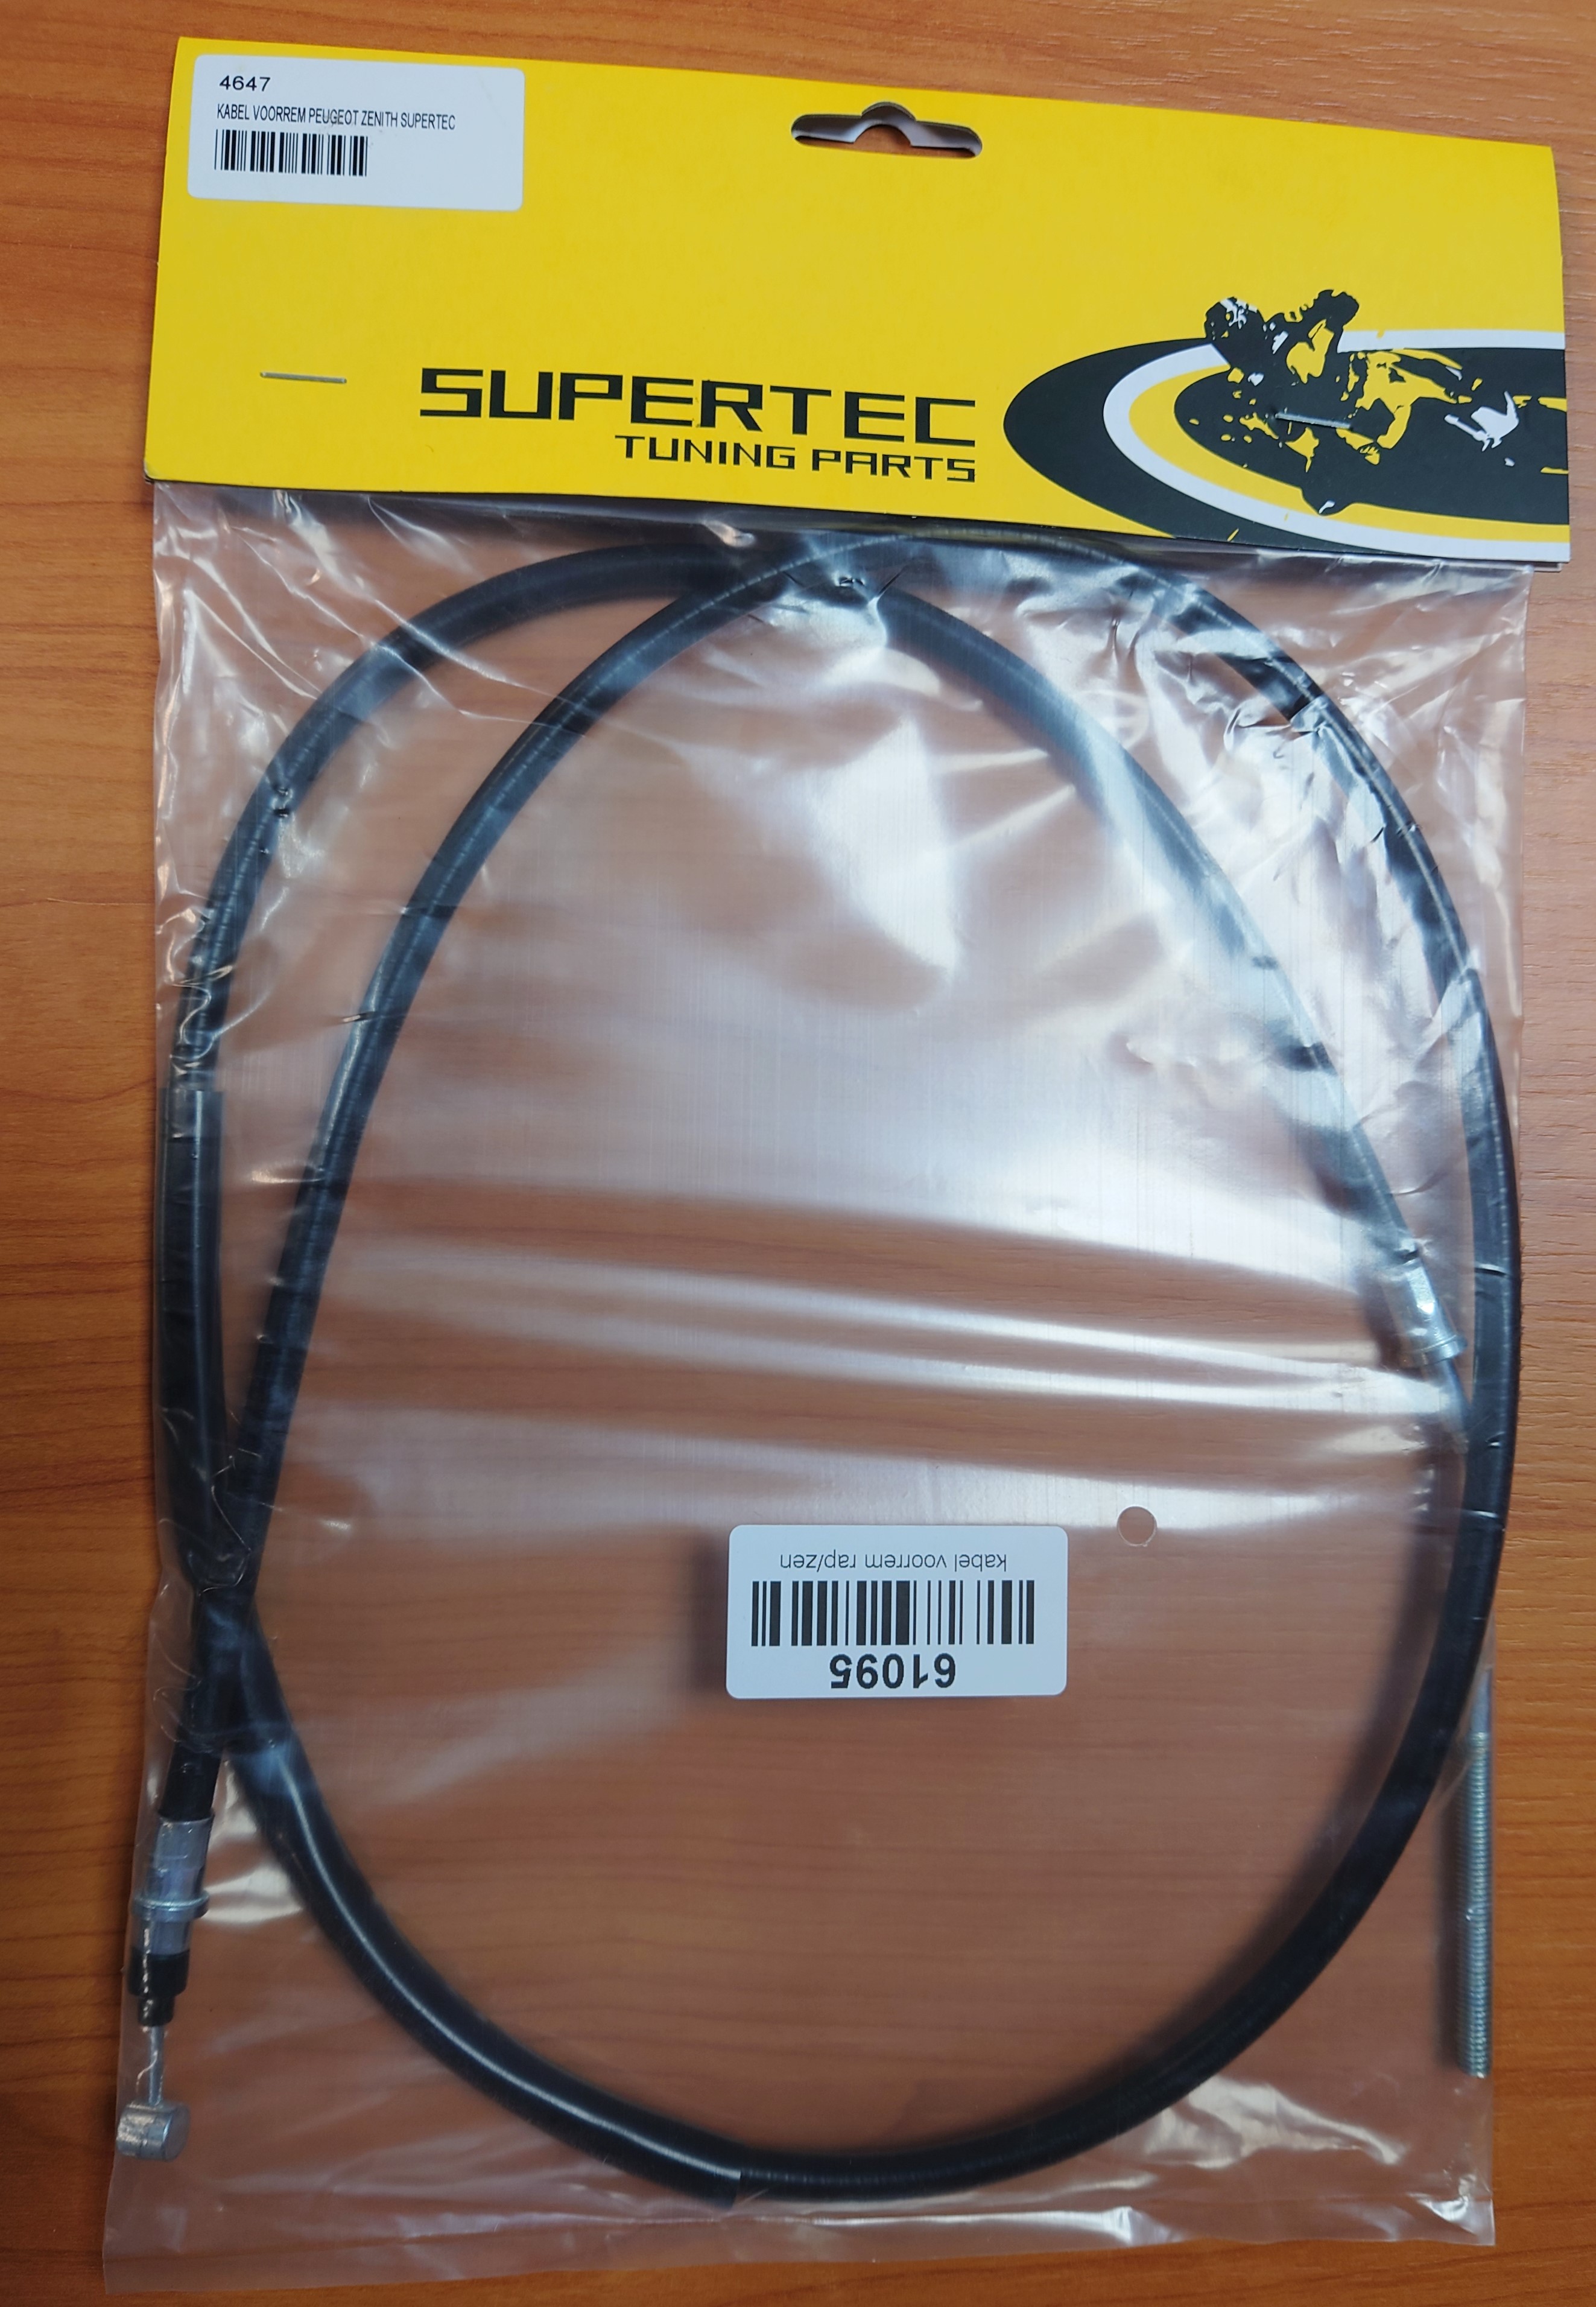 Cable for brake Peugeot Rapido Zenith